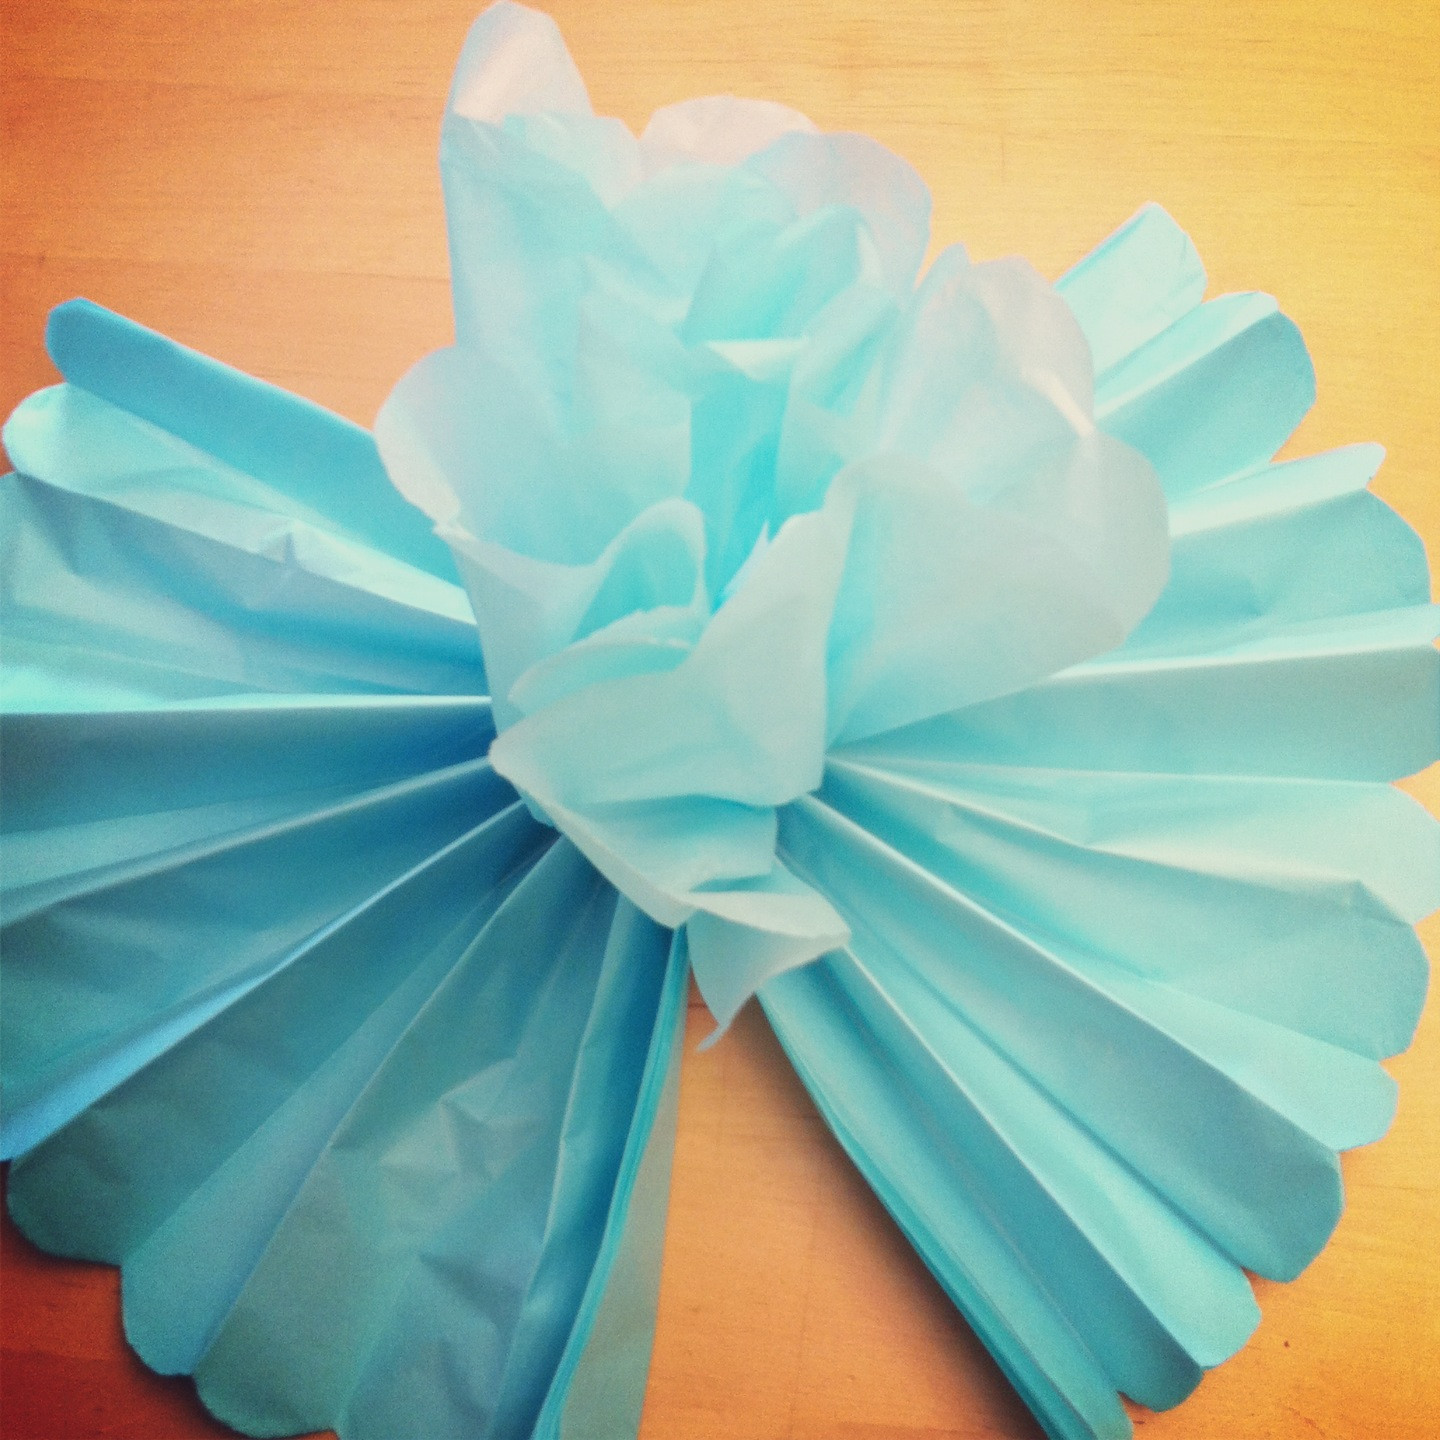 DIY Tissue Paper Decorations
 Tutorial How To Make DIY Giant Tissue Paper Flowers